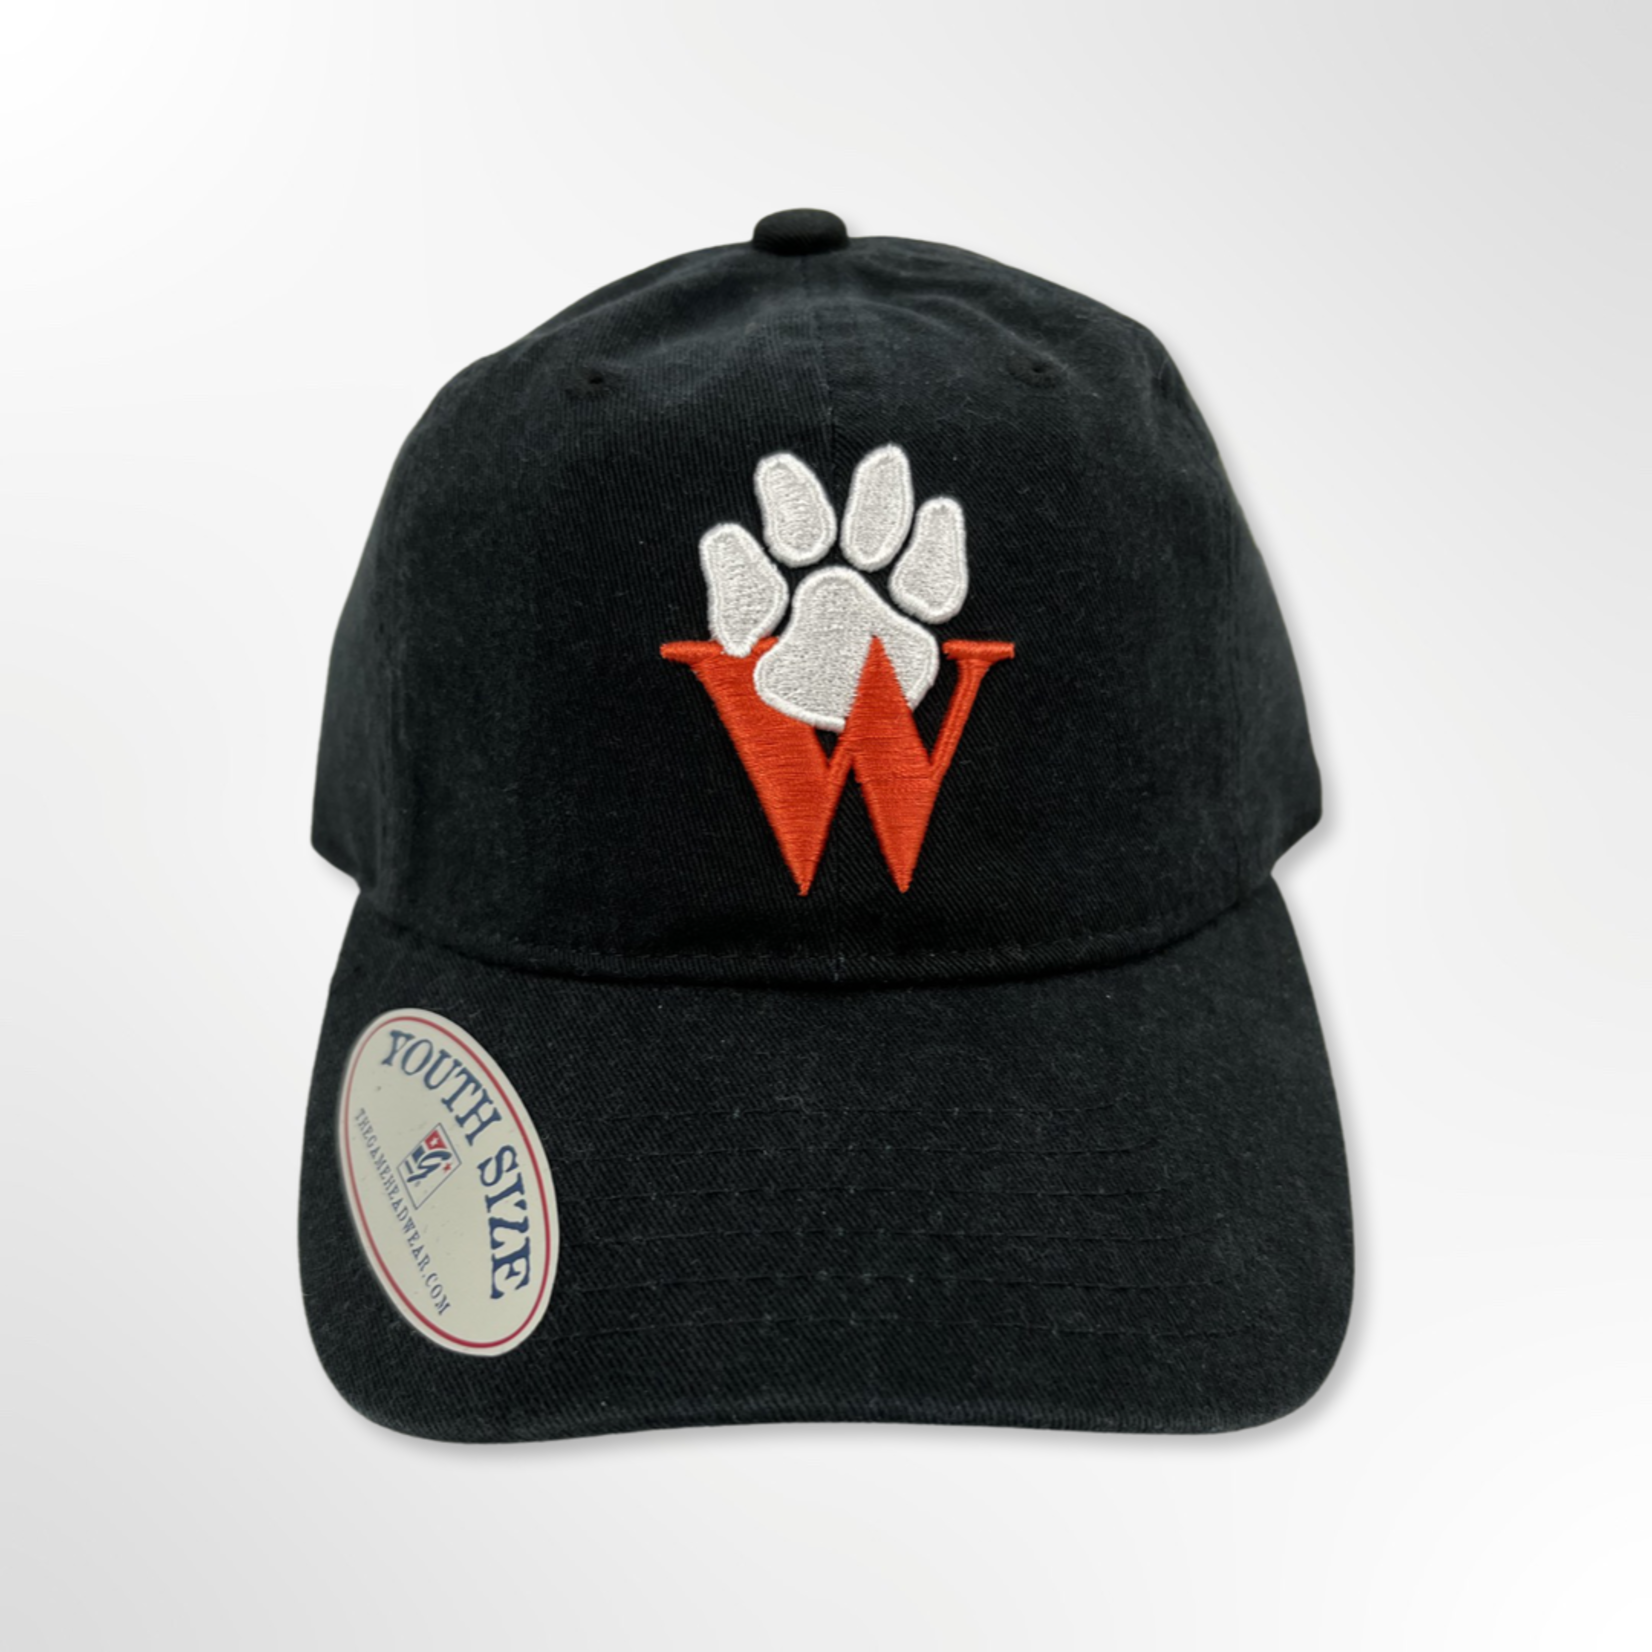 The Game Youth Hat with Paw